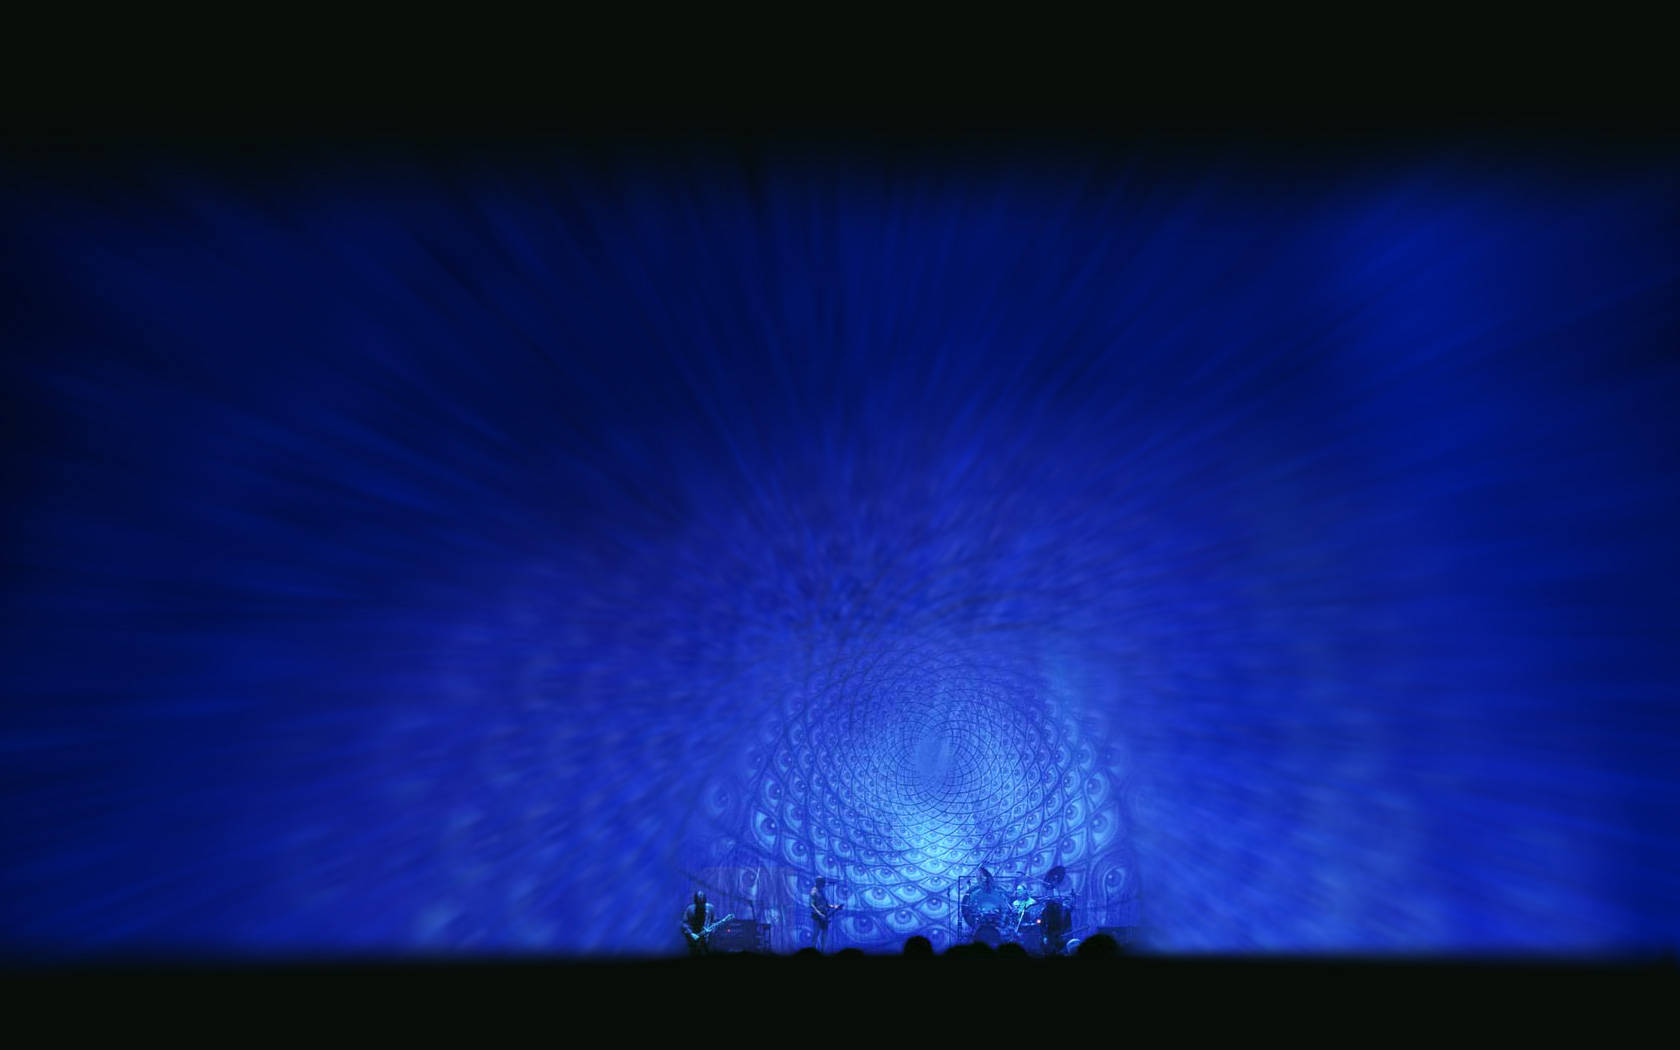 Iconic Rock Band Tool Against a Mesmerizing Blue Eye Pattern Wallpaper